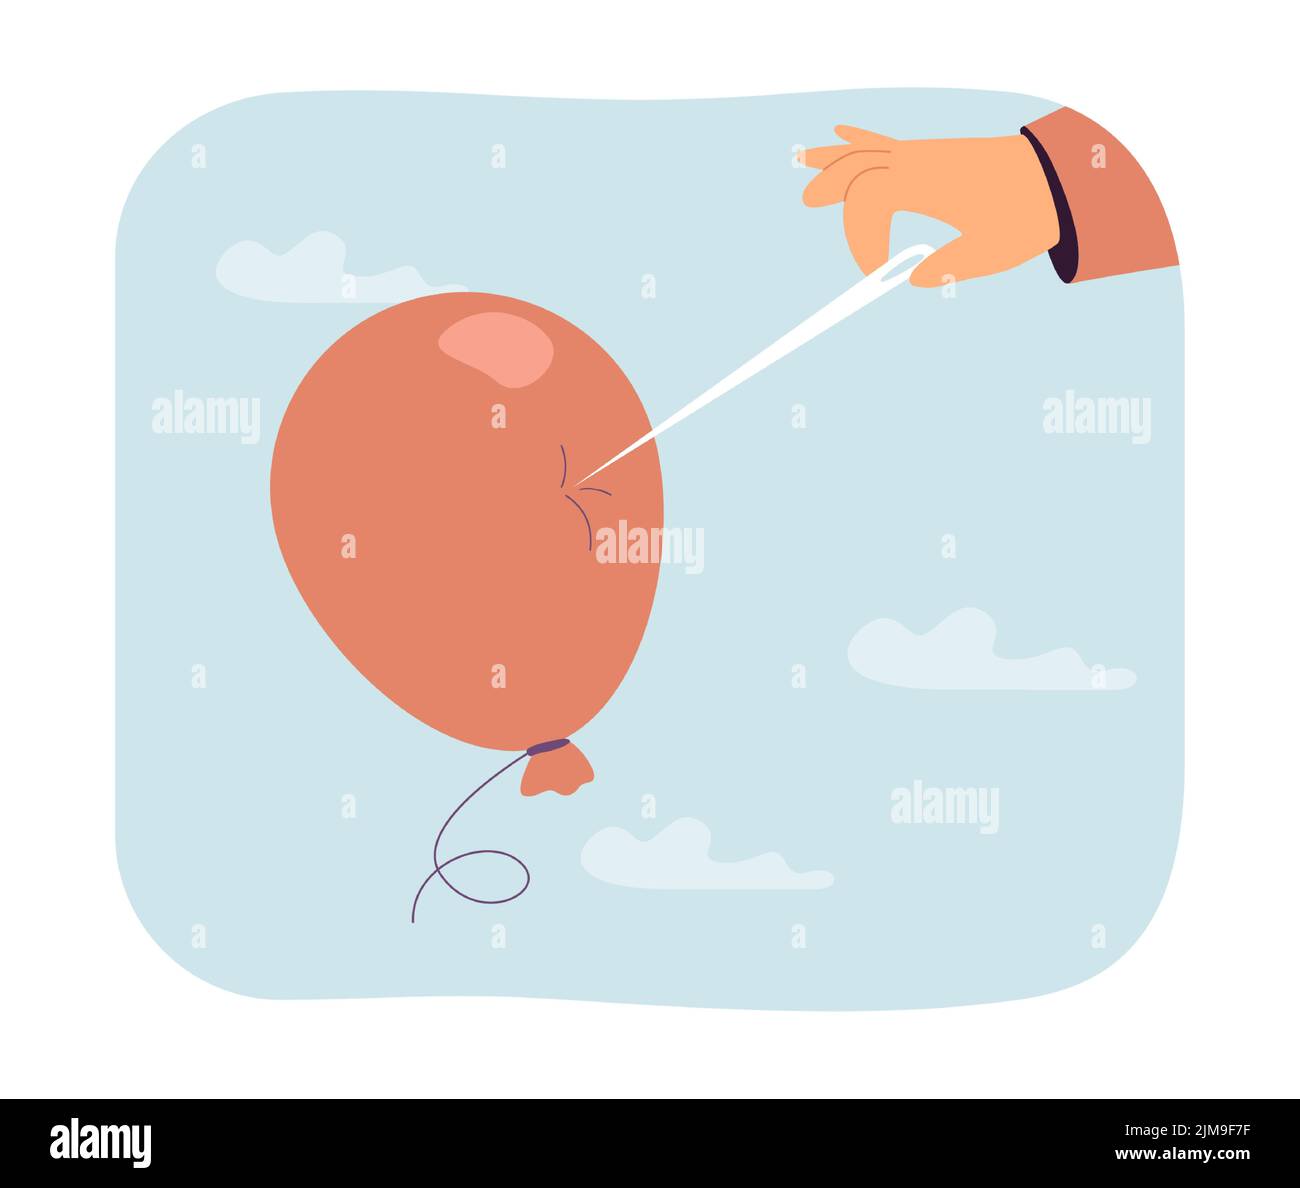 Popping balloon with needle Stock Vector Images - Alamy